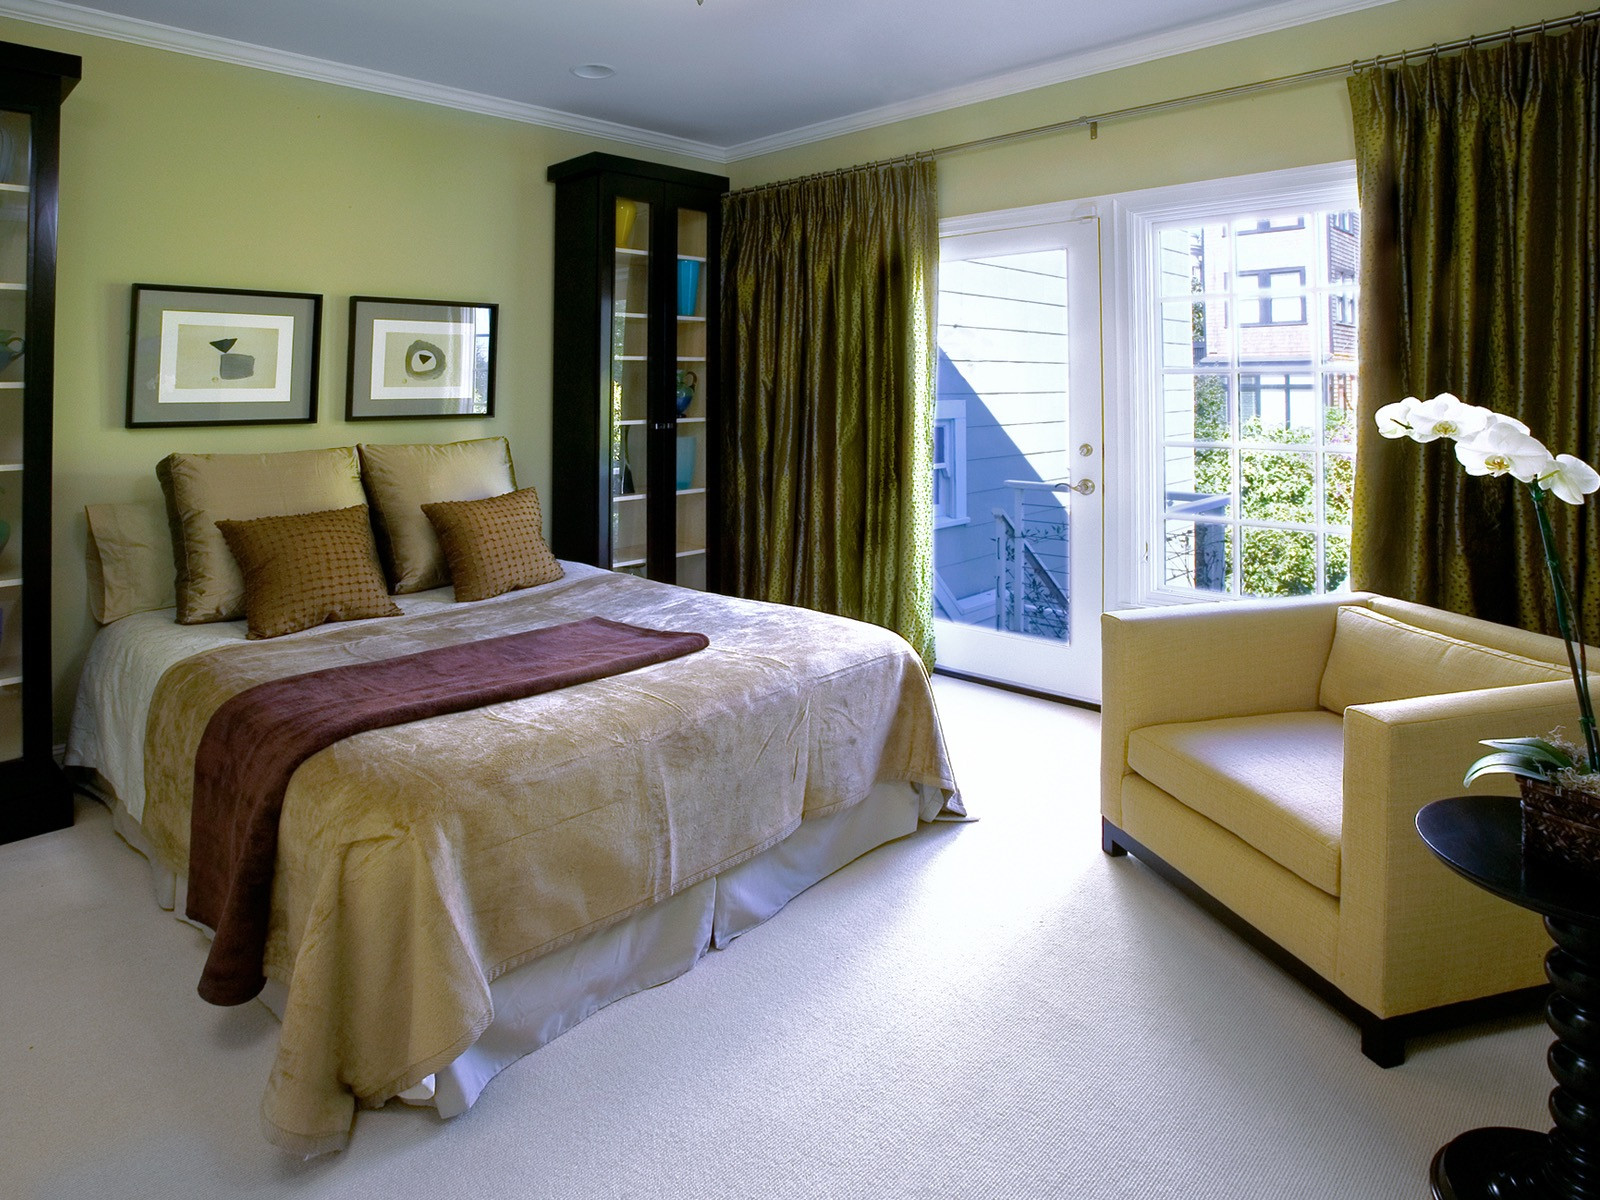 Modern Paint Colors For Bedroom
 20 Lovely Bedroom Paint And Color Ideas